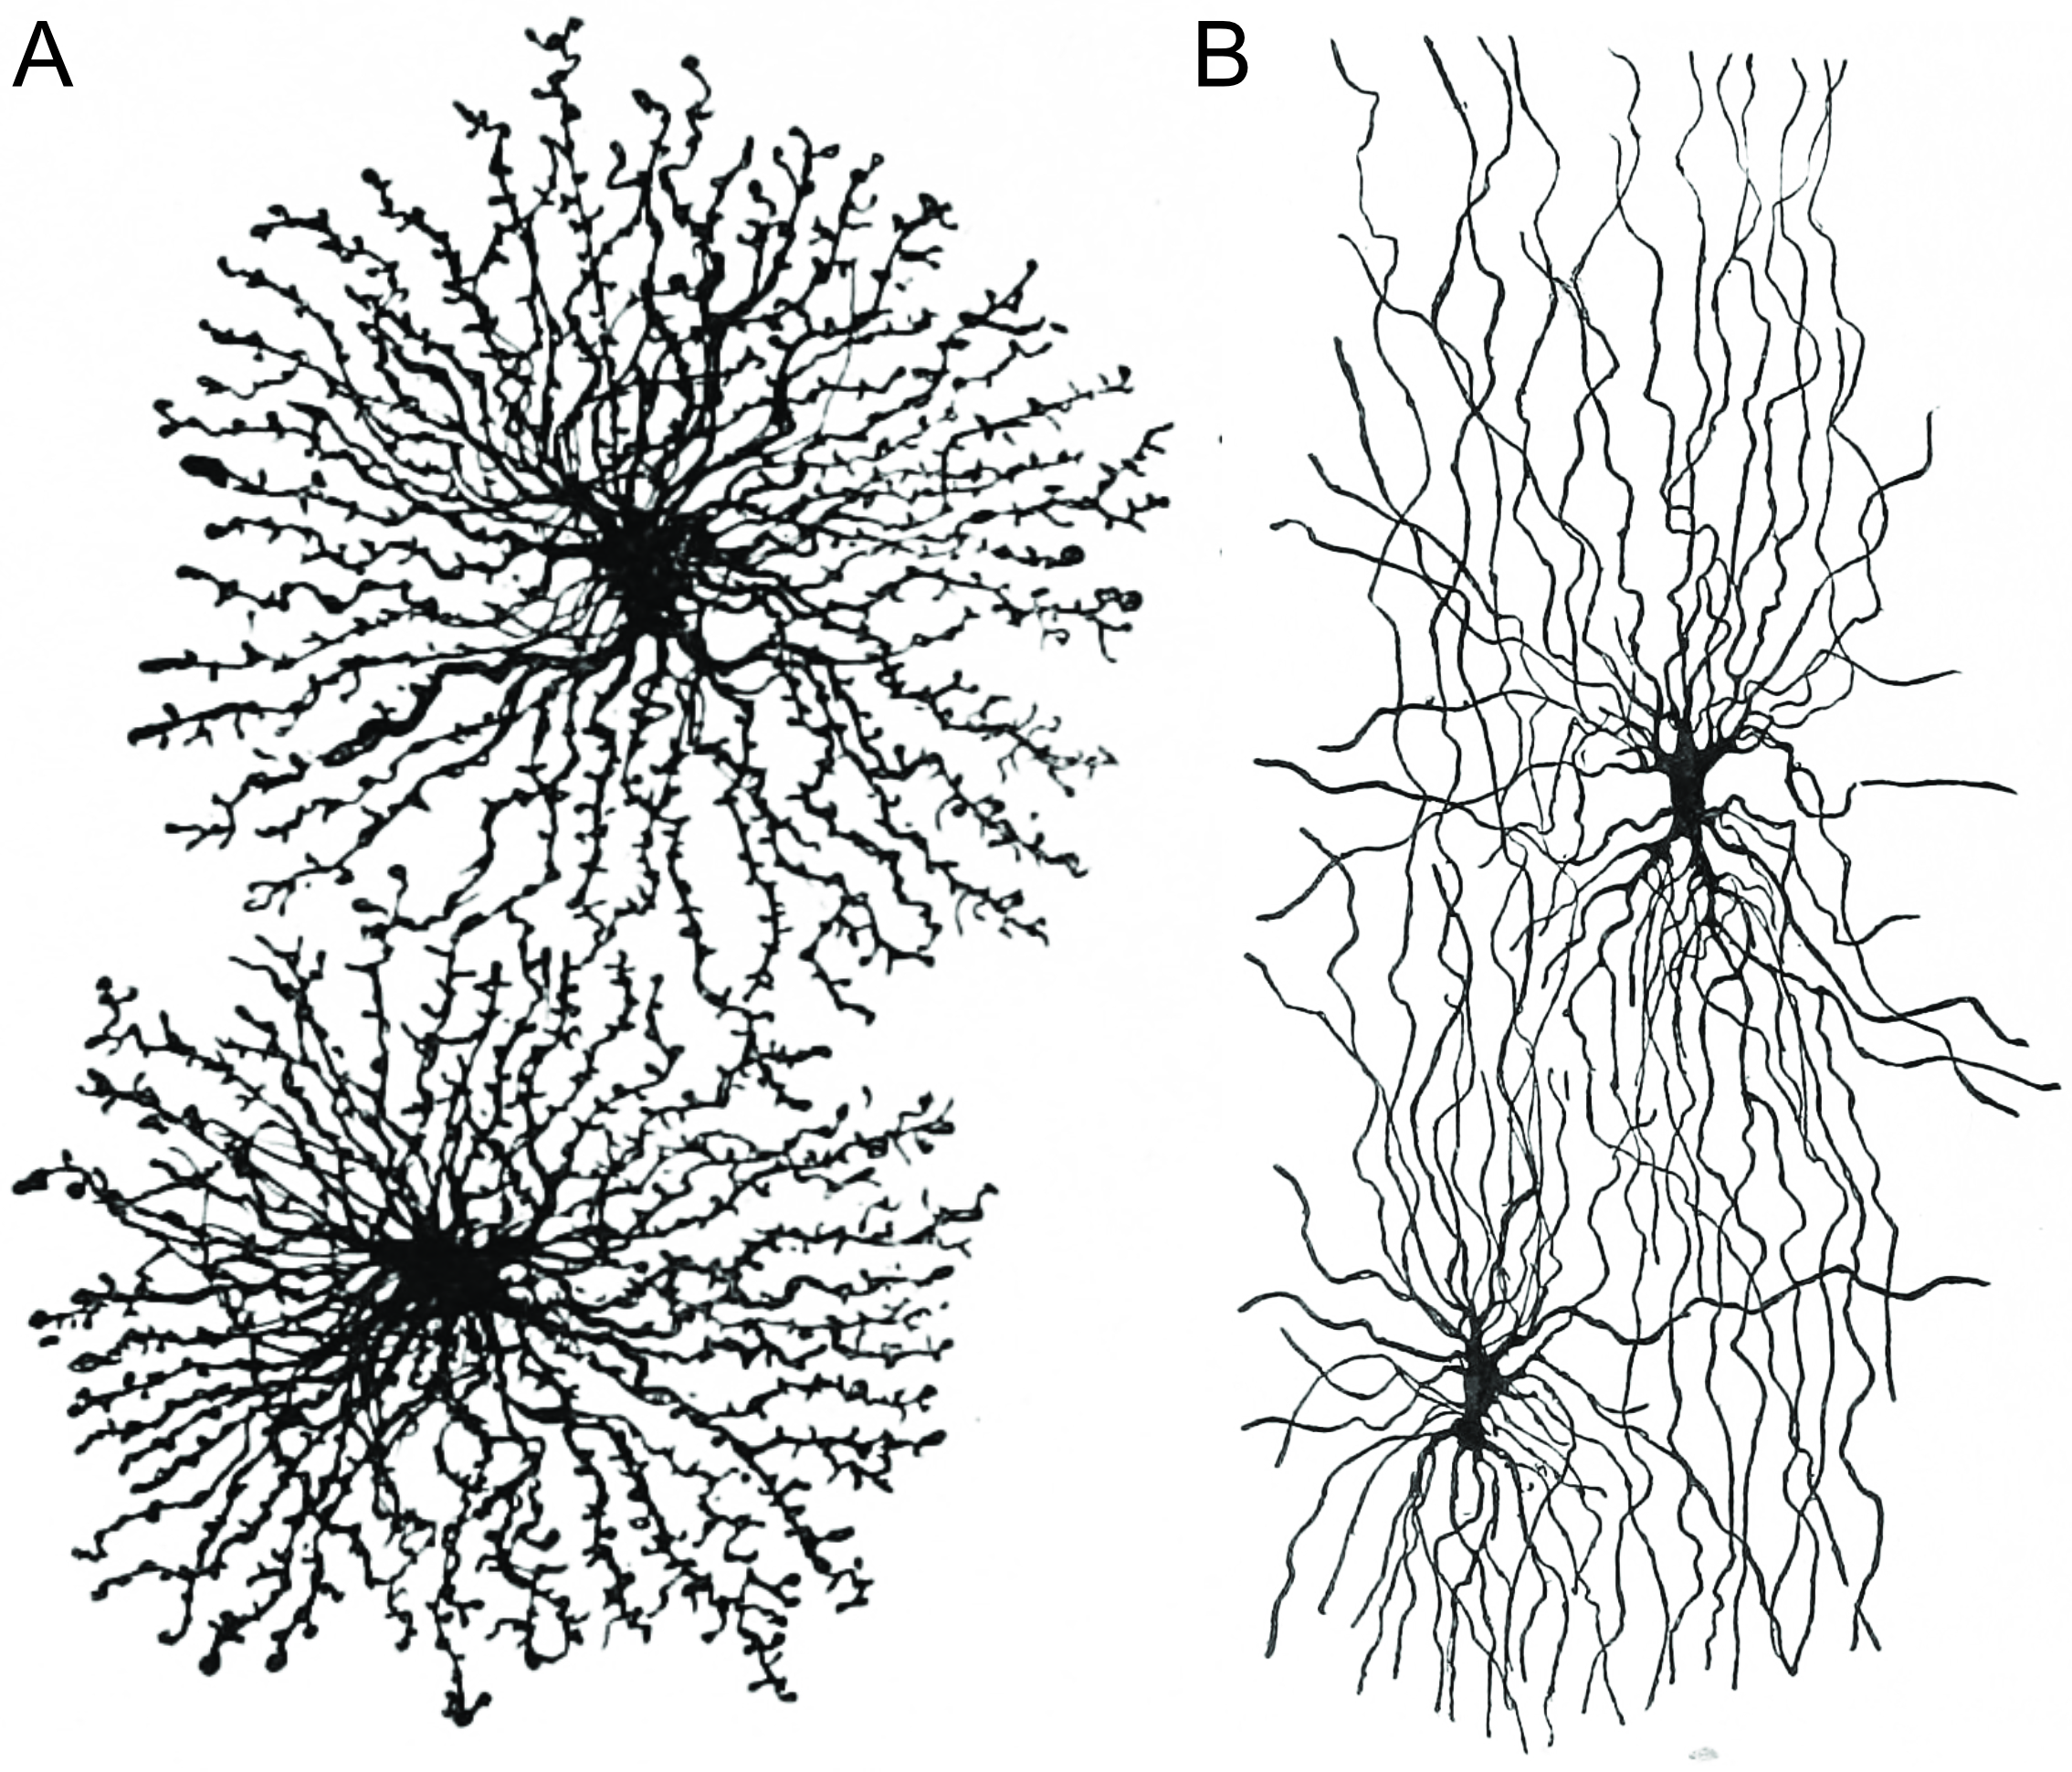 Astrocytes (A) and oligodendrocytes (B) are the major types of macroglia in the grey and white matter of the brain, respectively. Histologie du système nerveux de l’homme & des vertébrés, Tome Premier (1909) by Santiago Ramón y Cajal translated from Spanish by Dr. L. Azoulay.